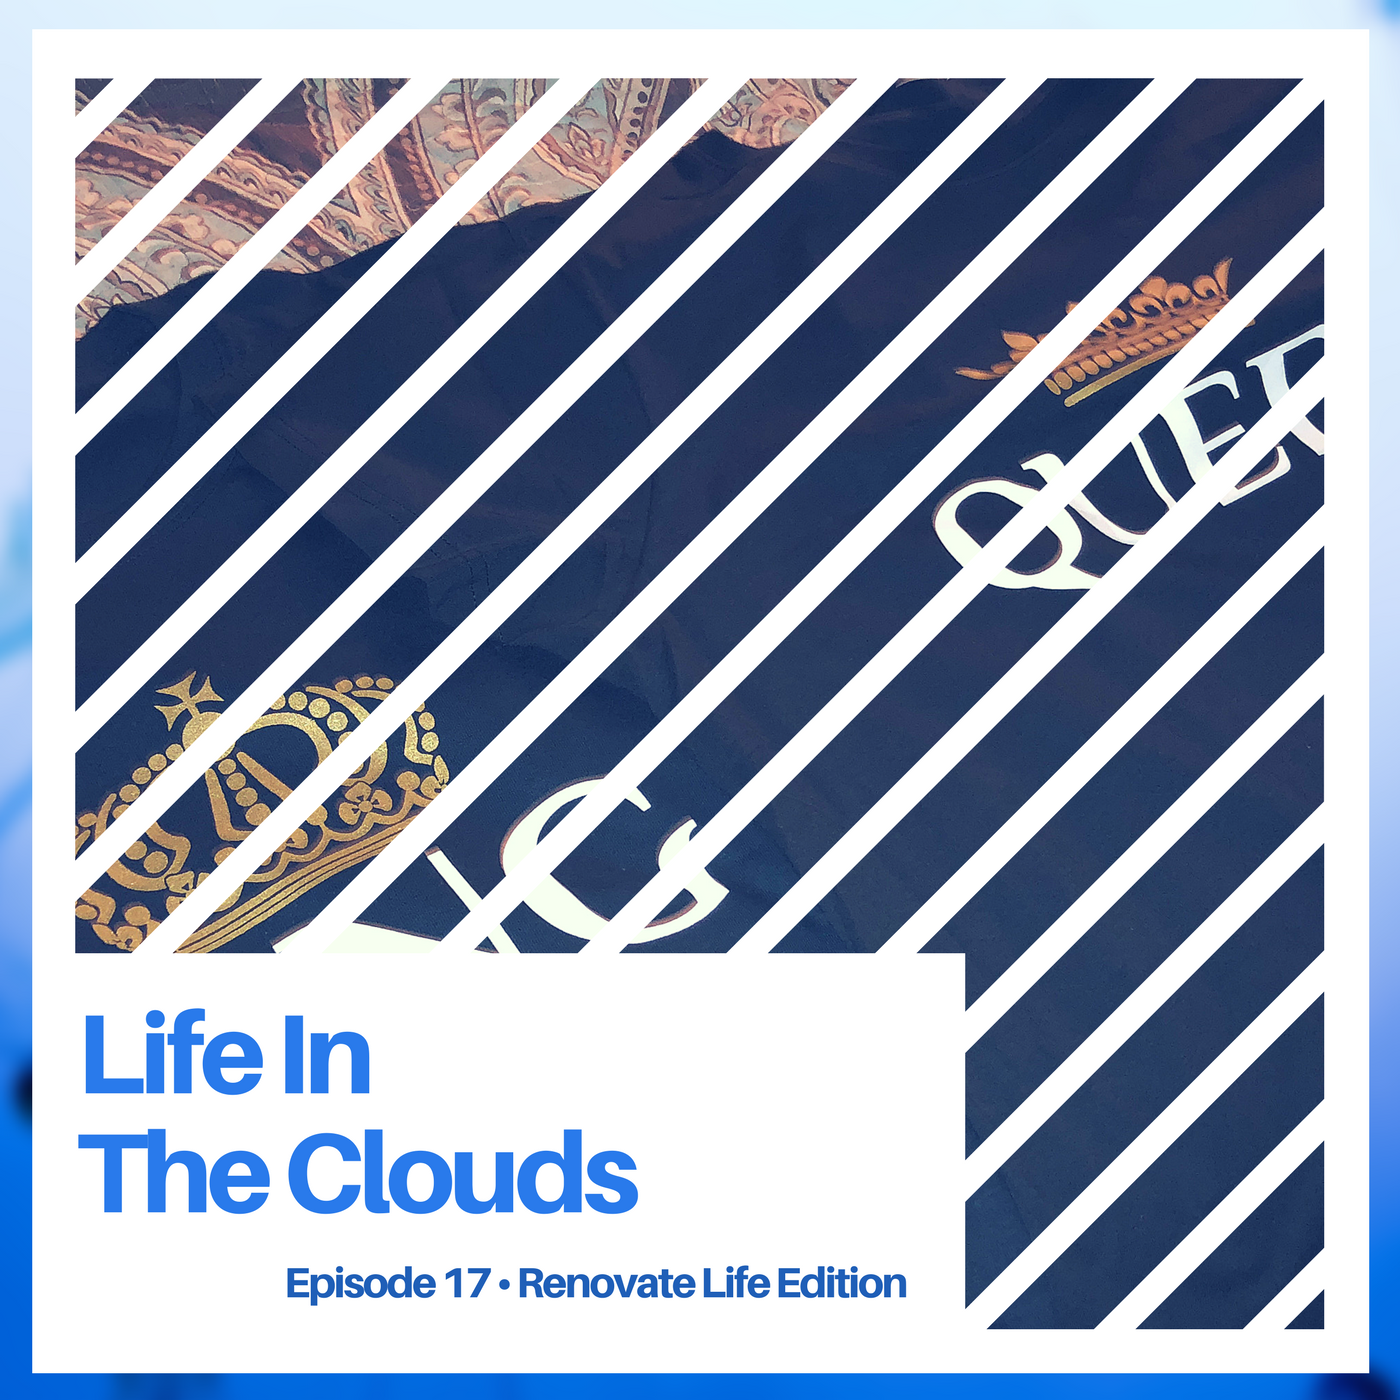 Life in the Clouds Episode 17 Cover image